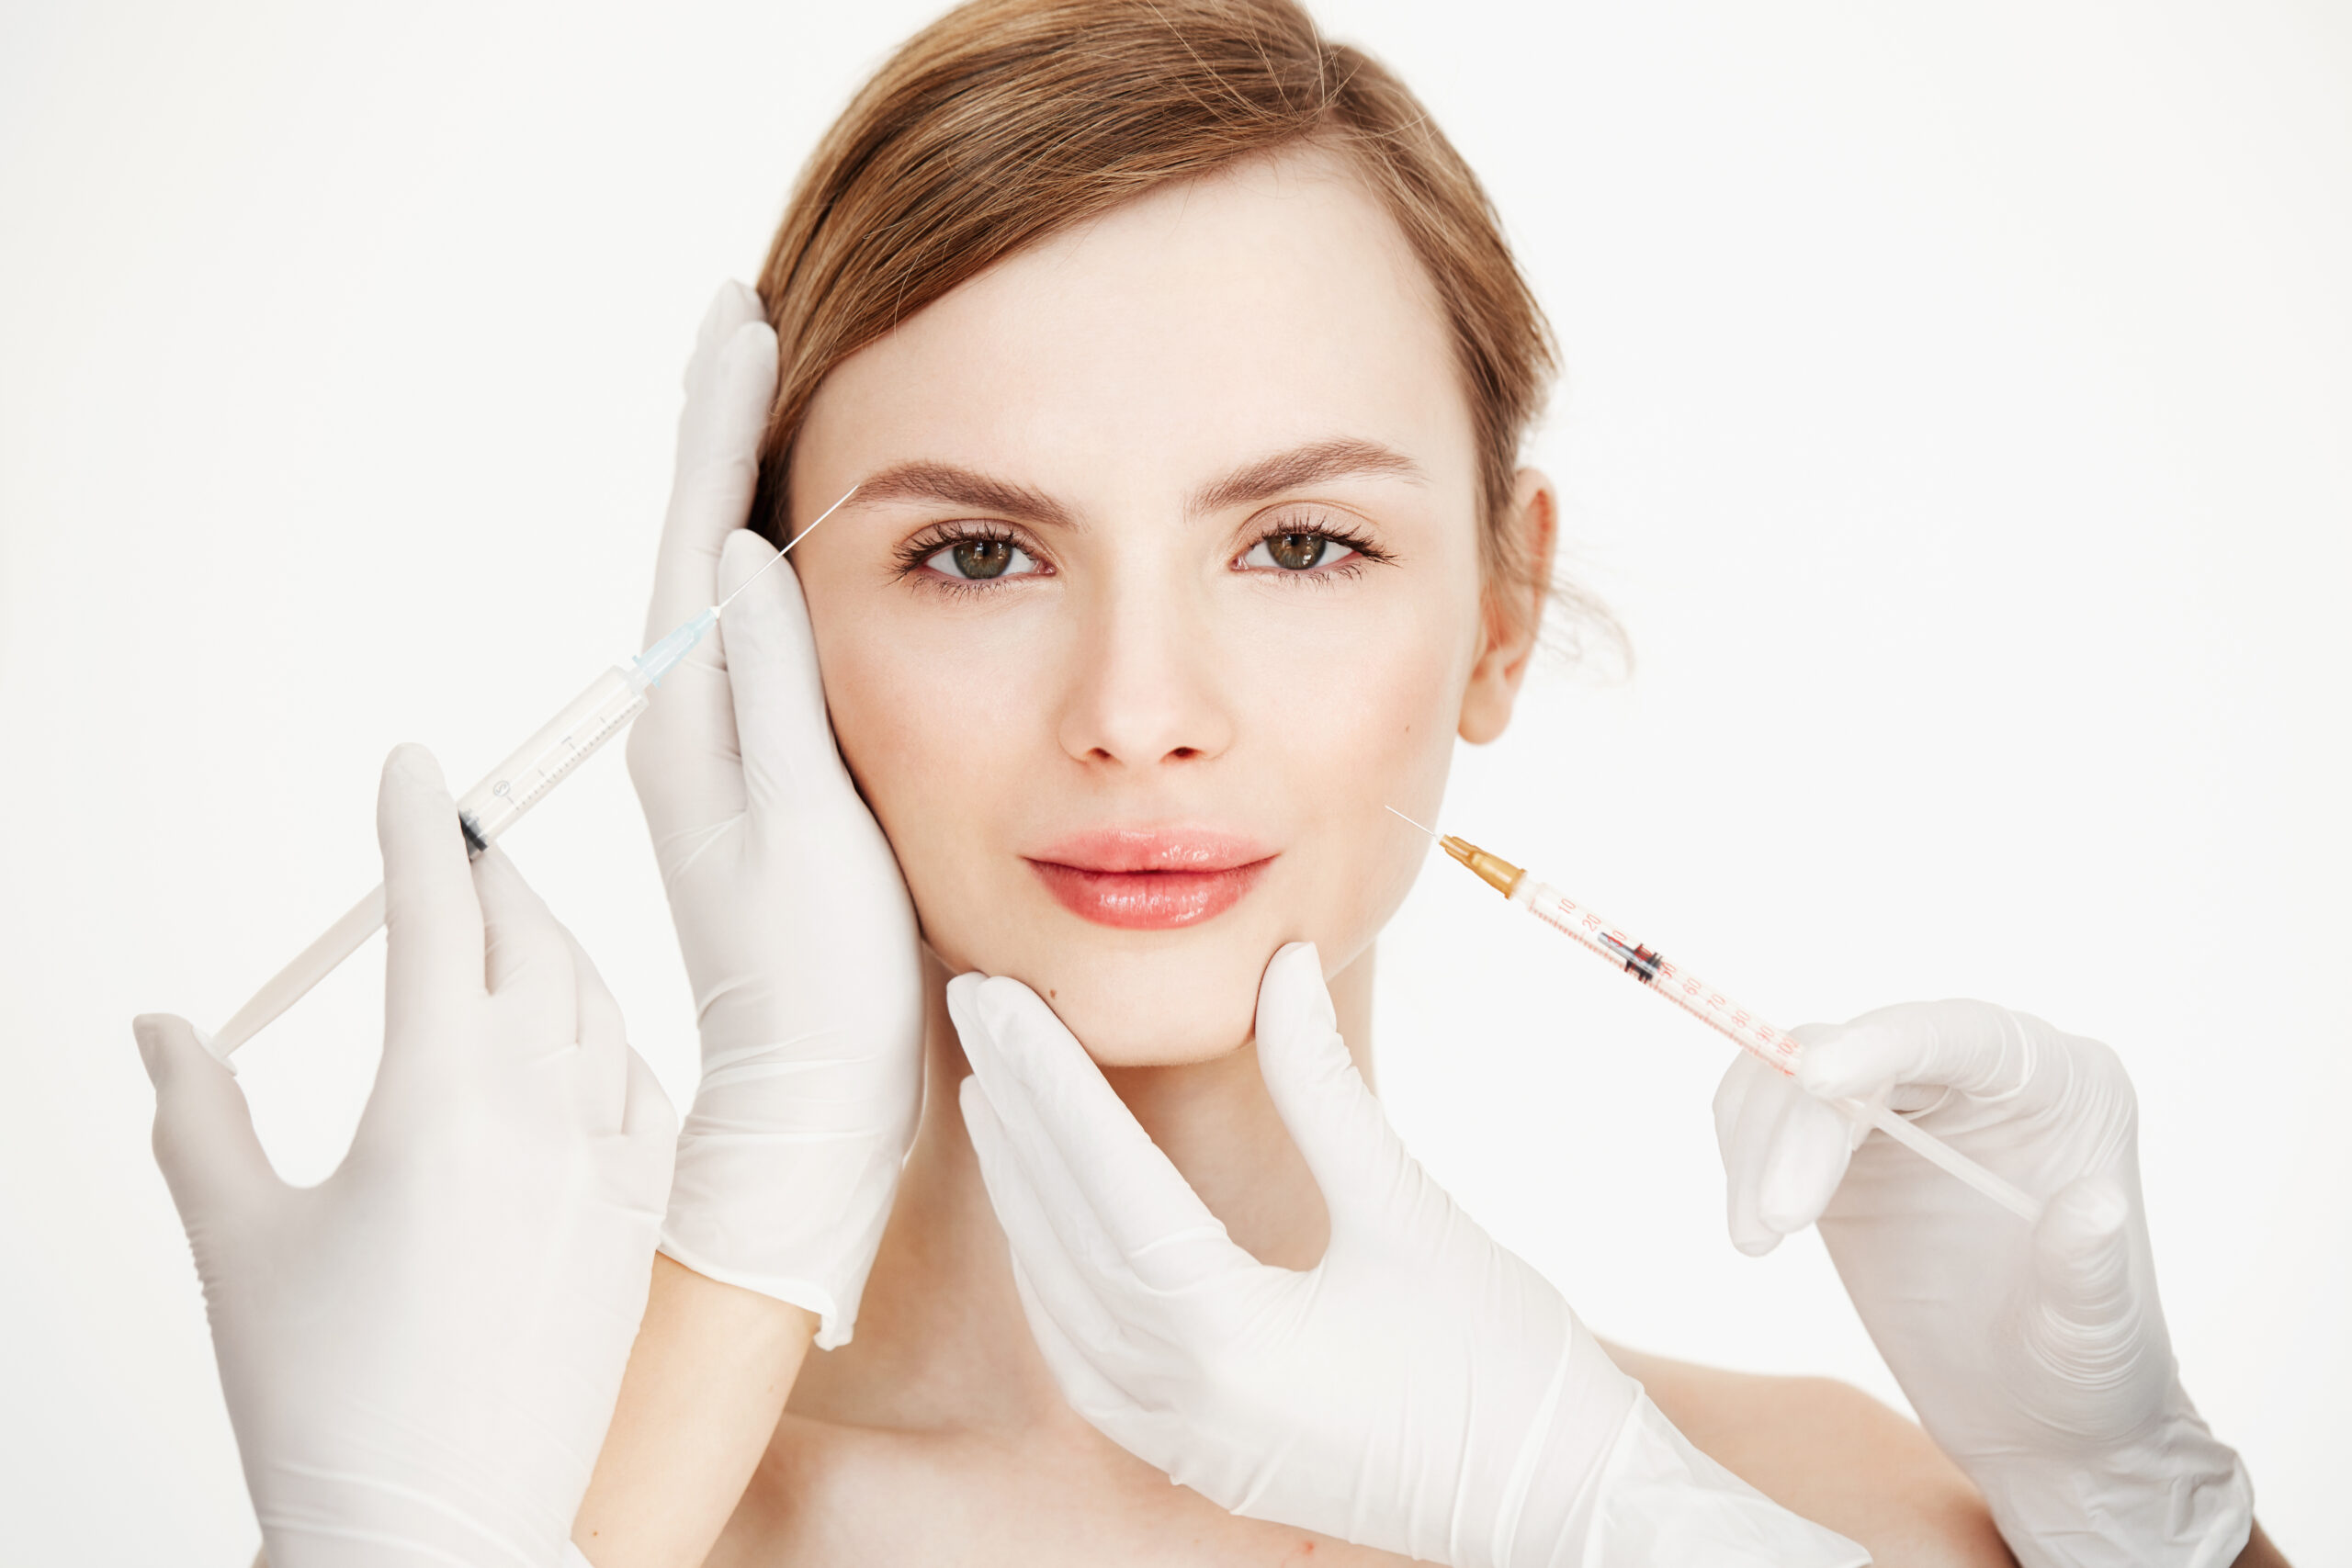 botox injections to beautiful blonde. Skin lifting. Facial treatment. Beauty and spa